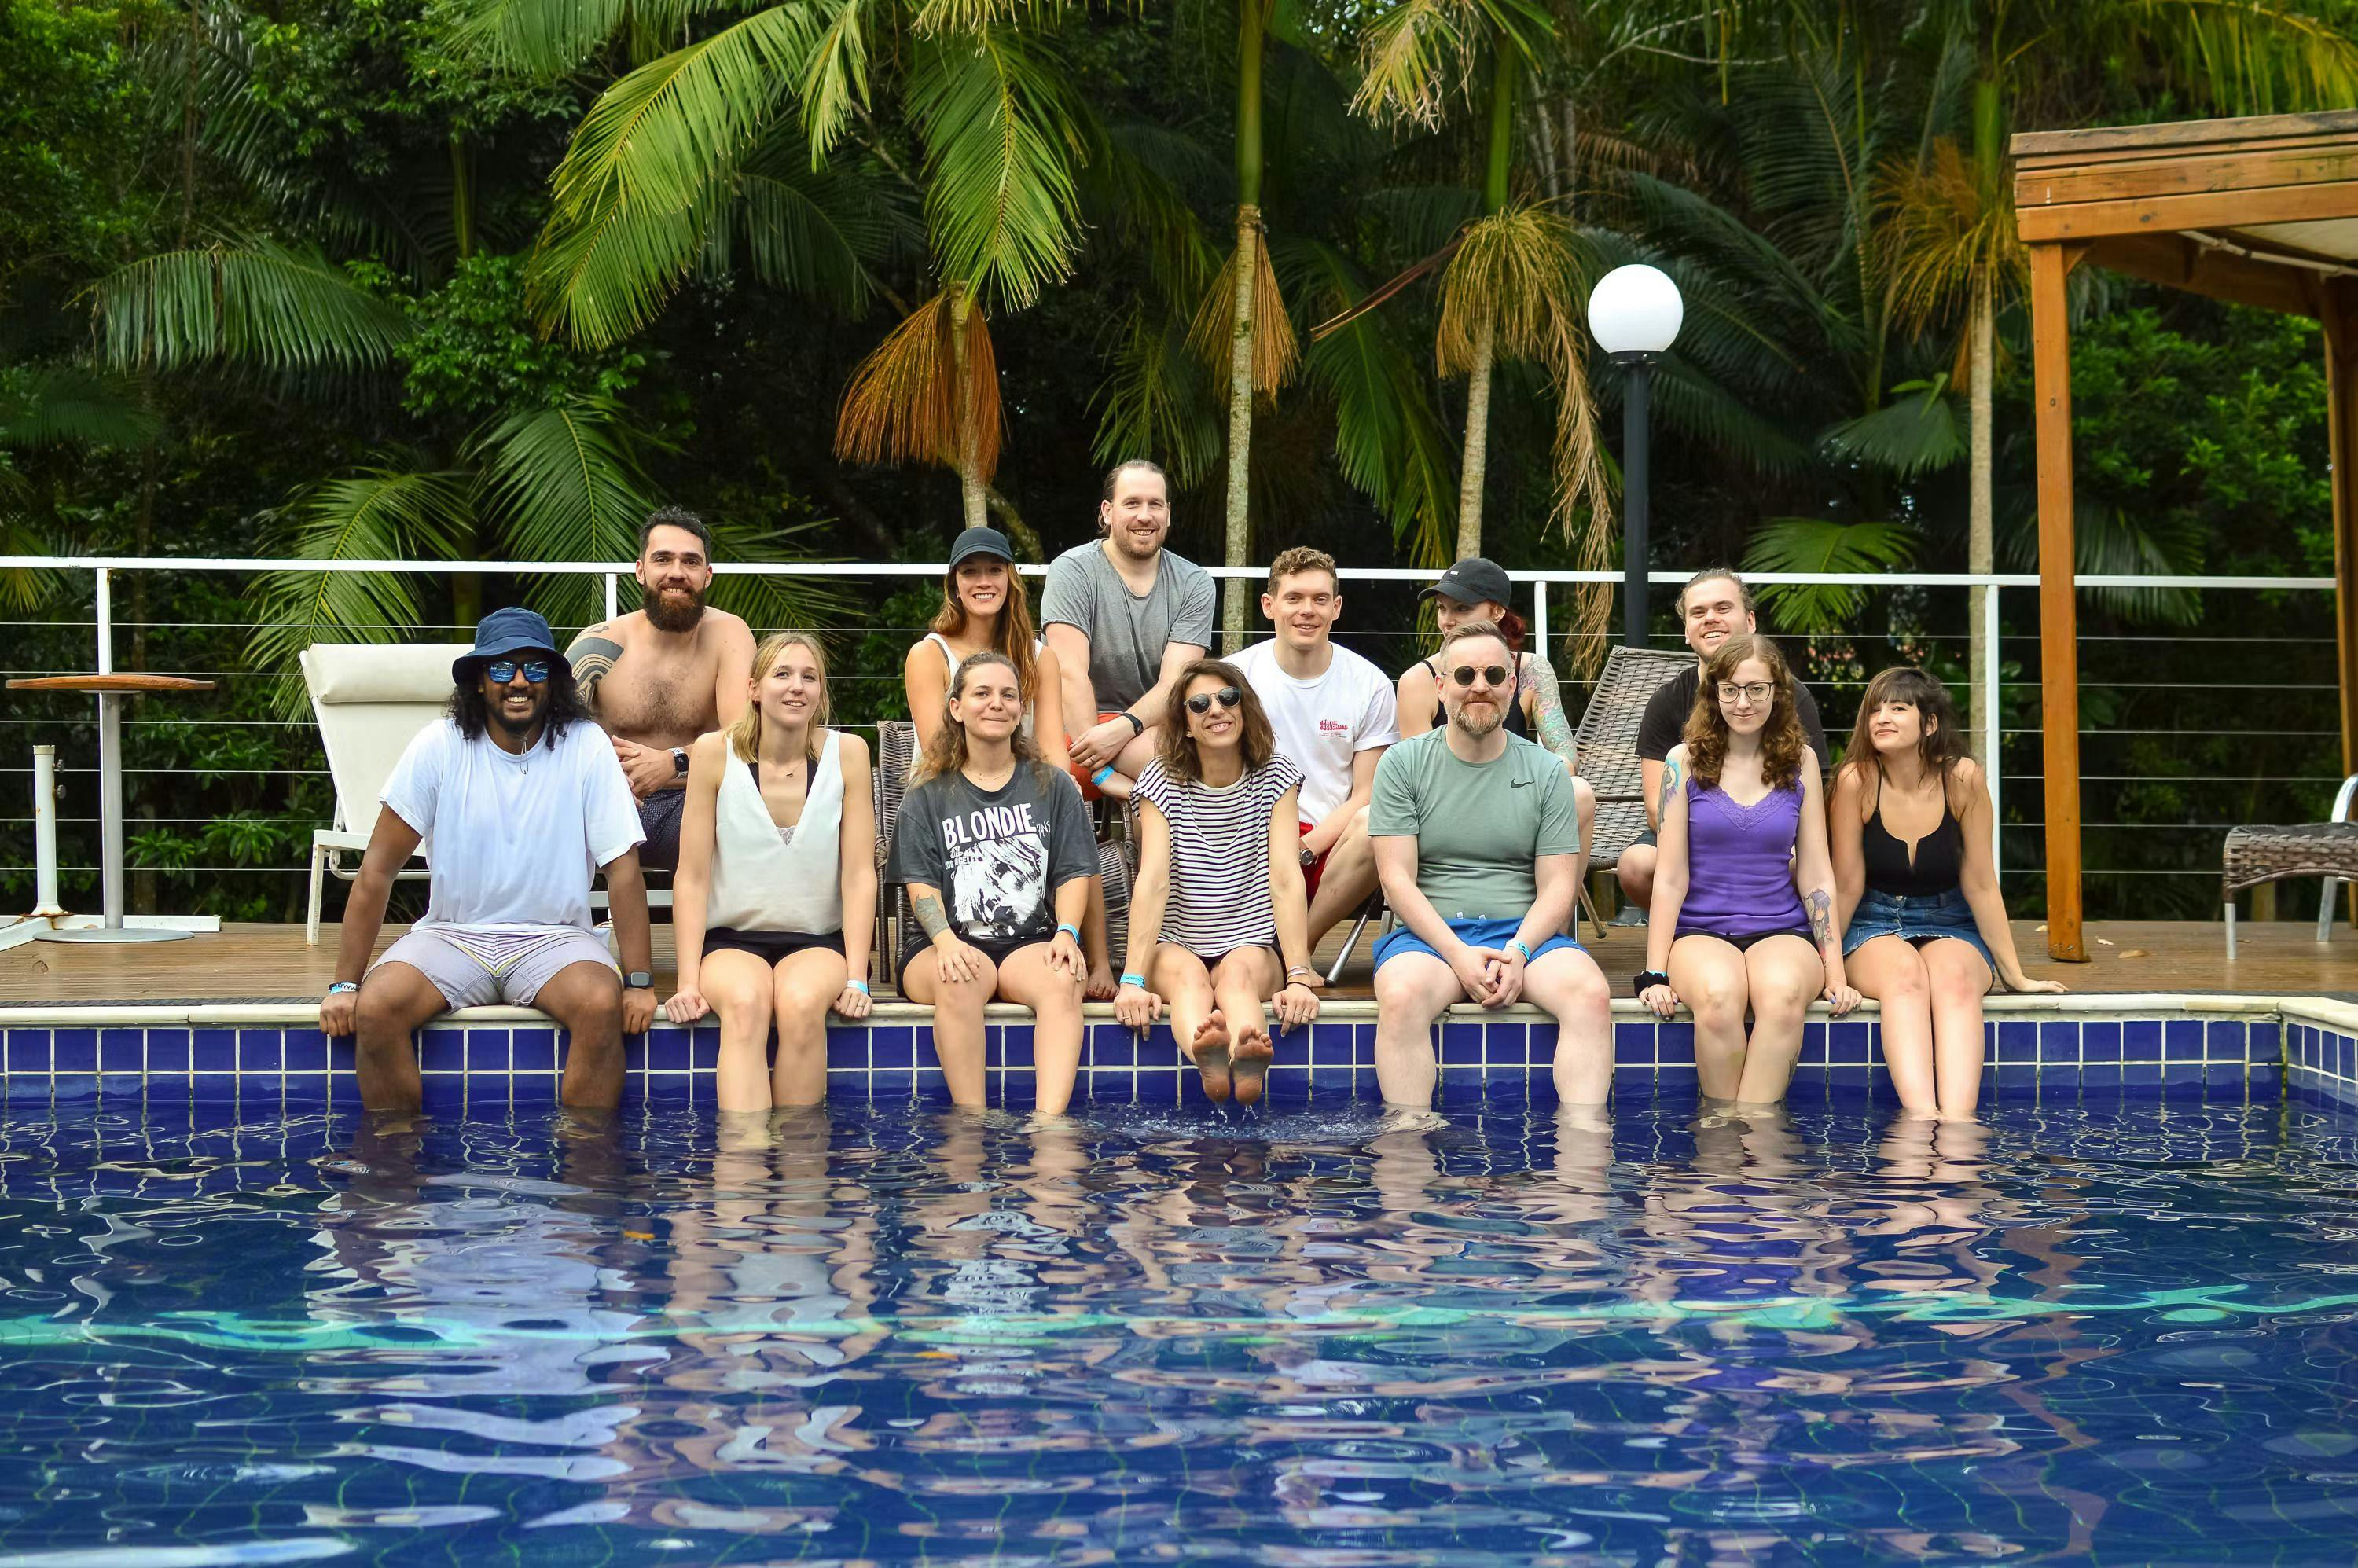 14islands team picture at the pool